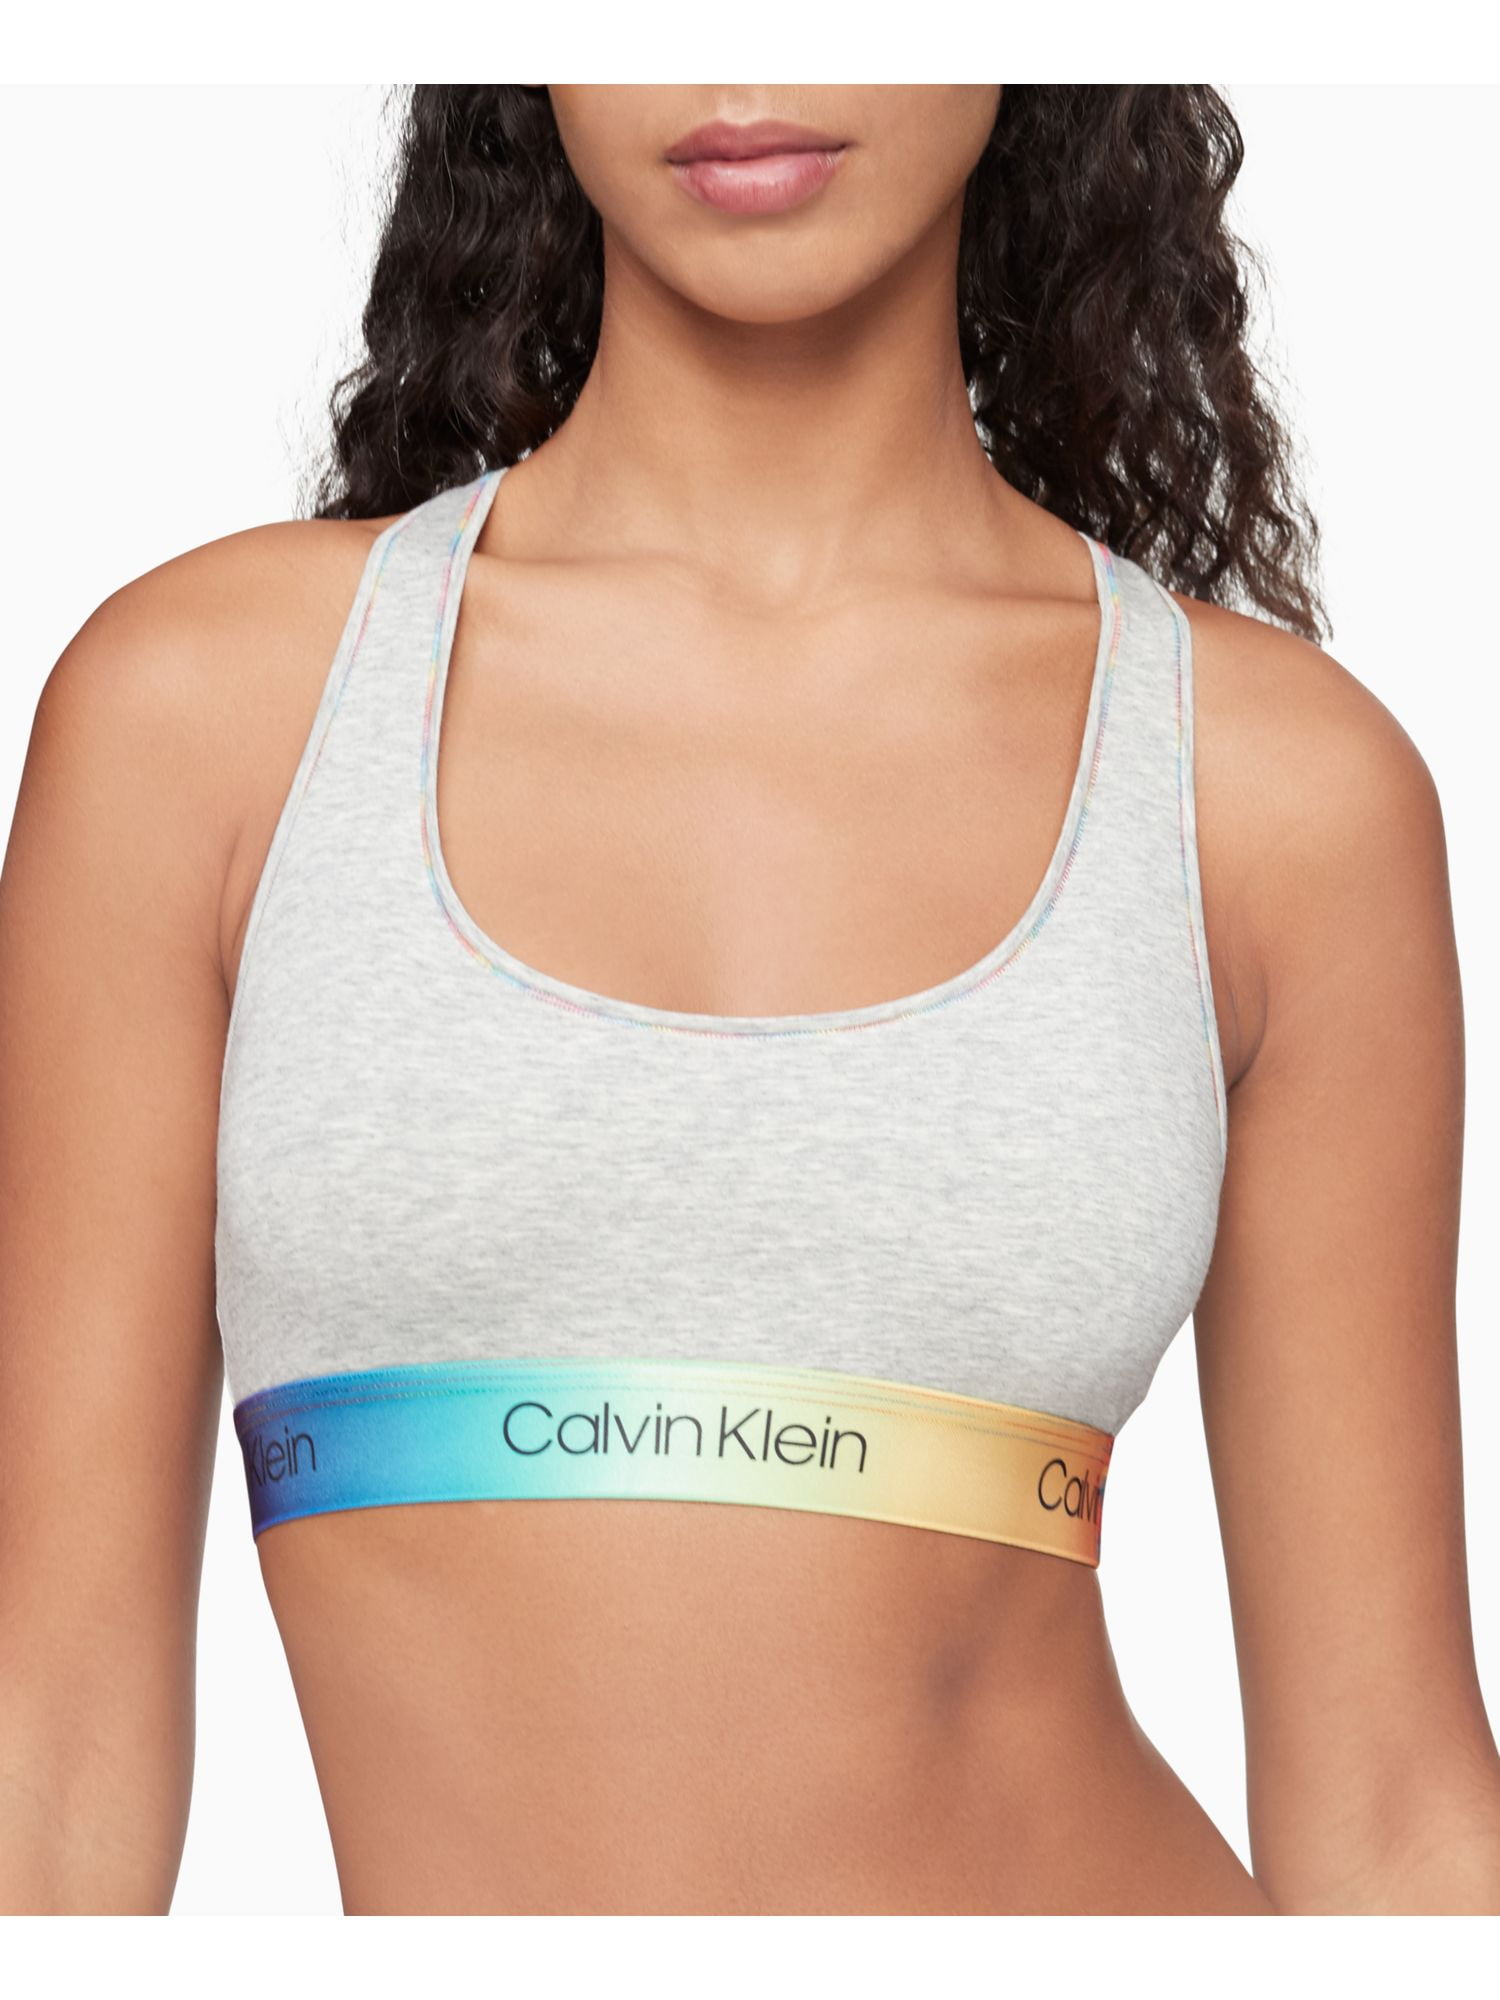 CALVIN KLEIN Nymph's Thigh Modern Cotton Lined Bralette, US X-Small, NWOT